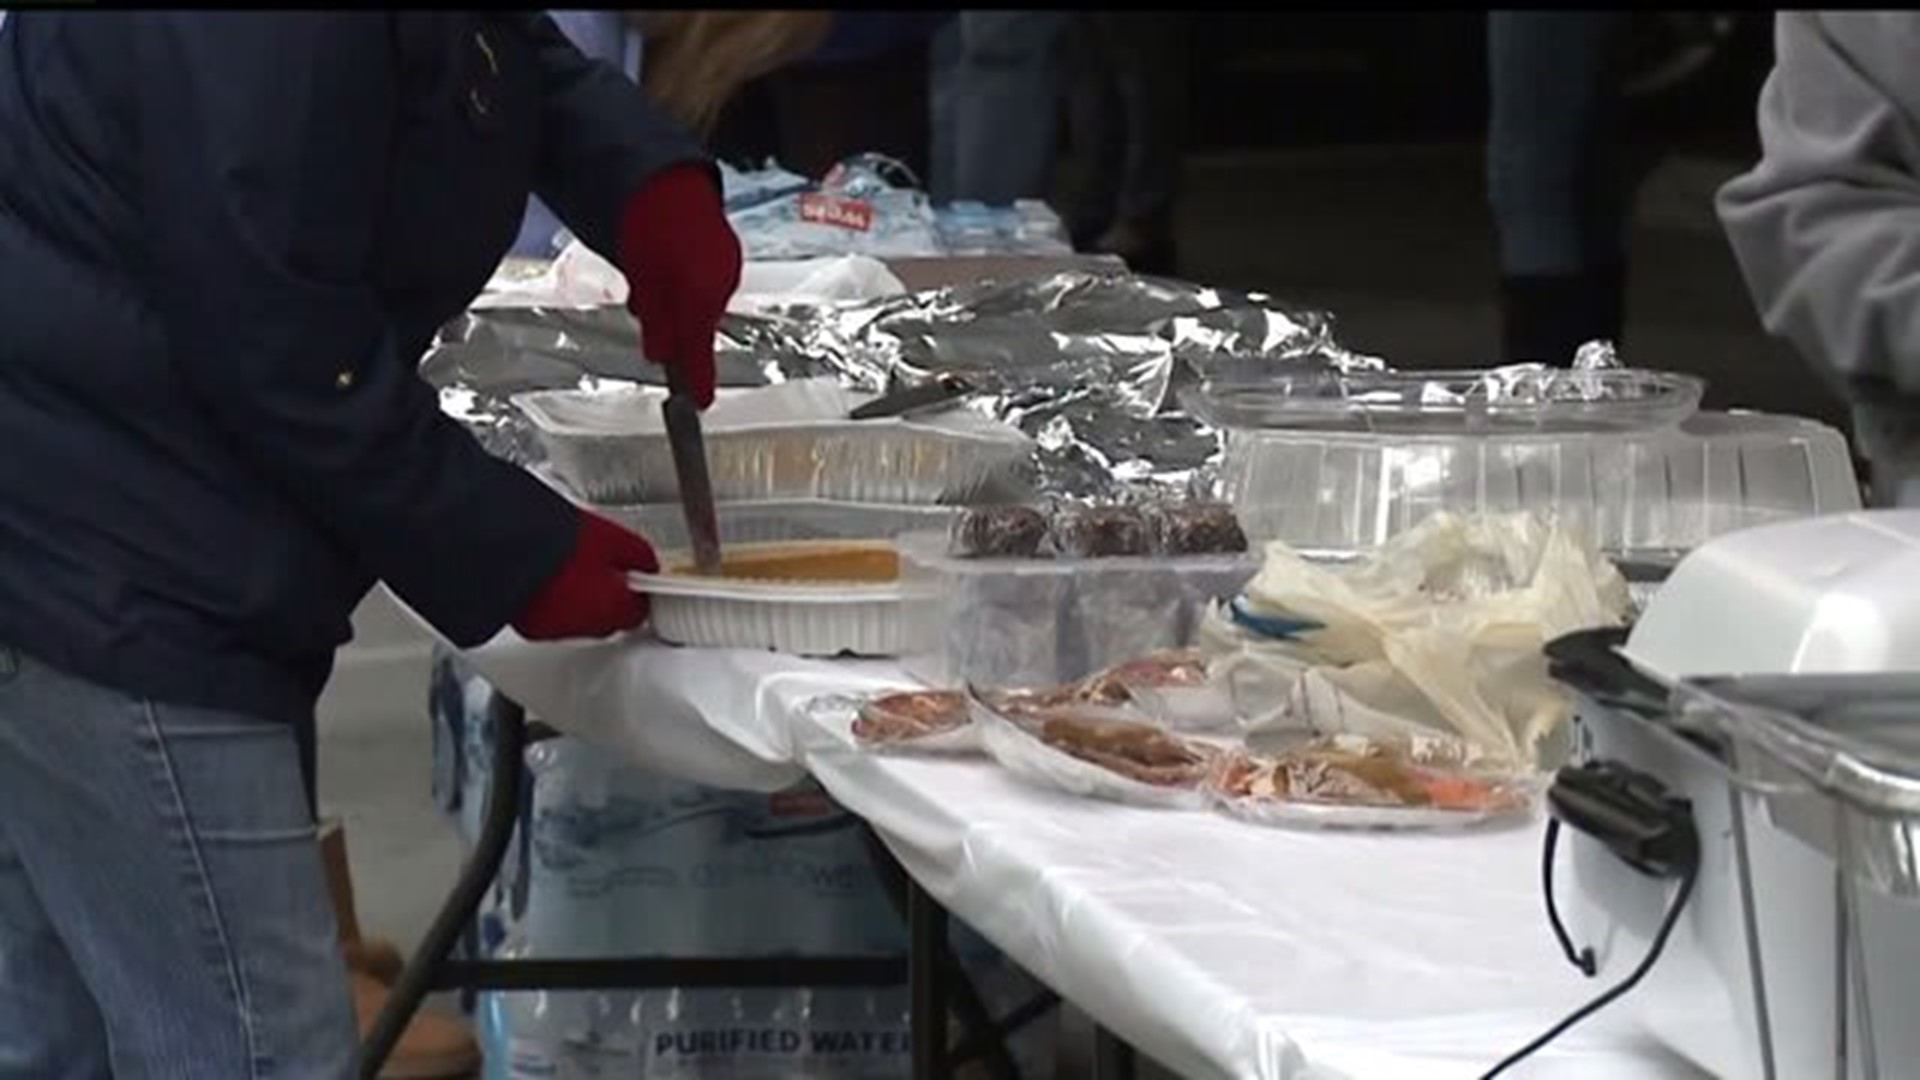 Local company continues to feed homeless despite losing business